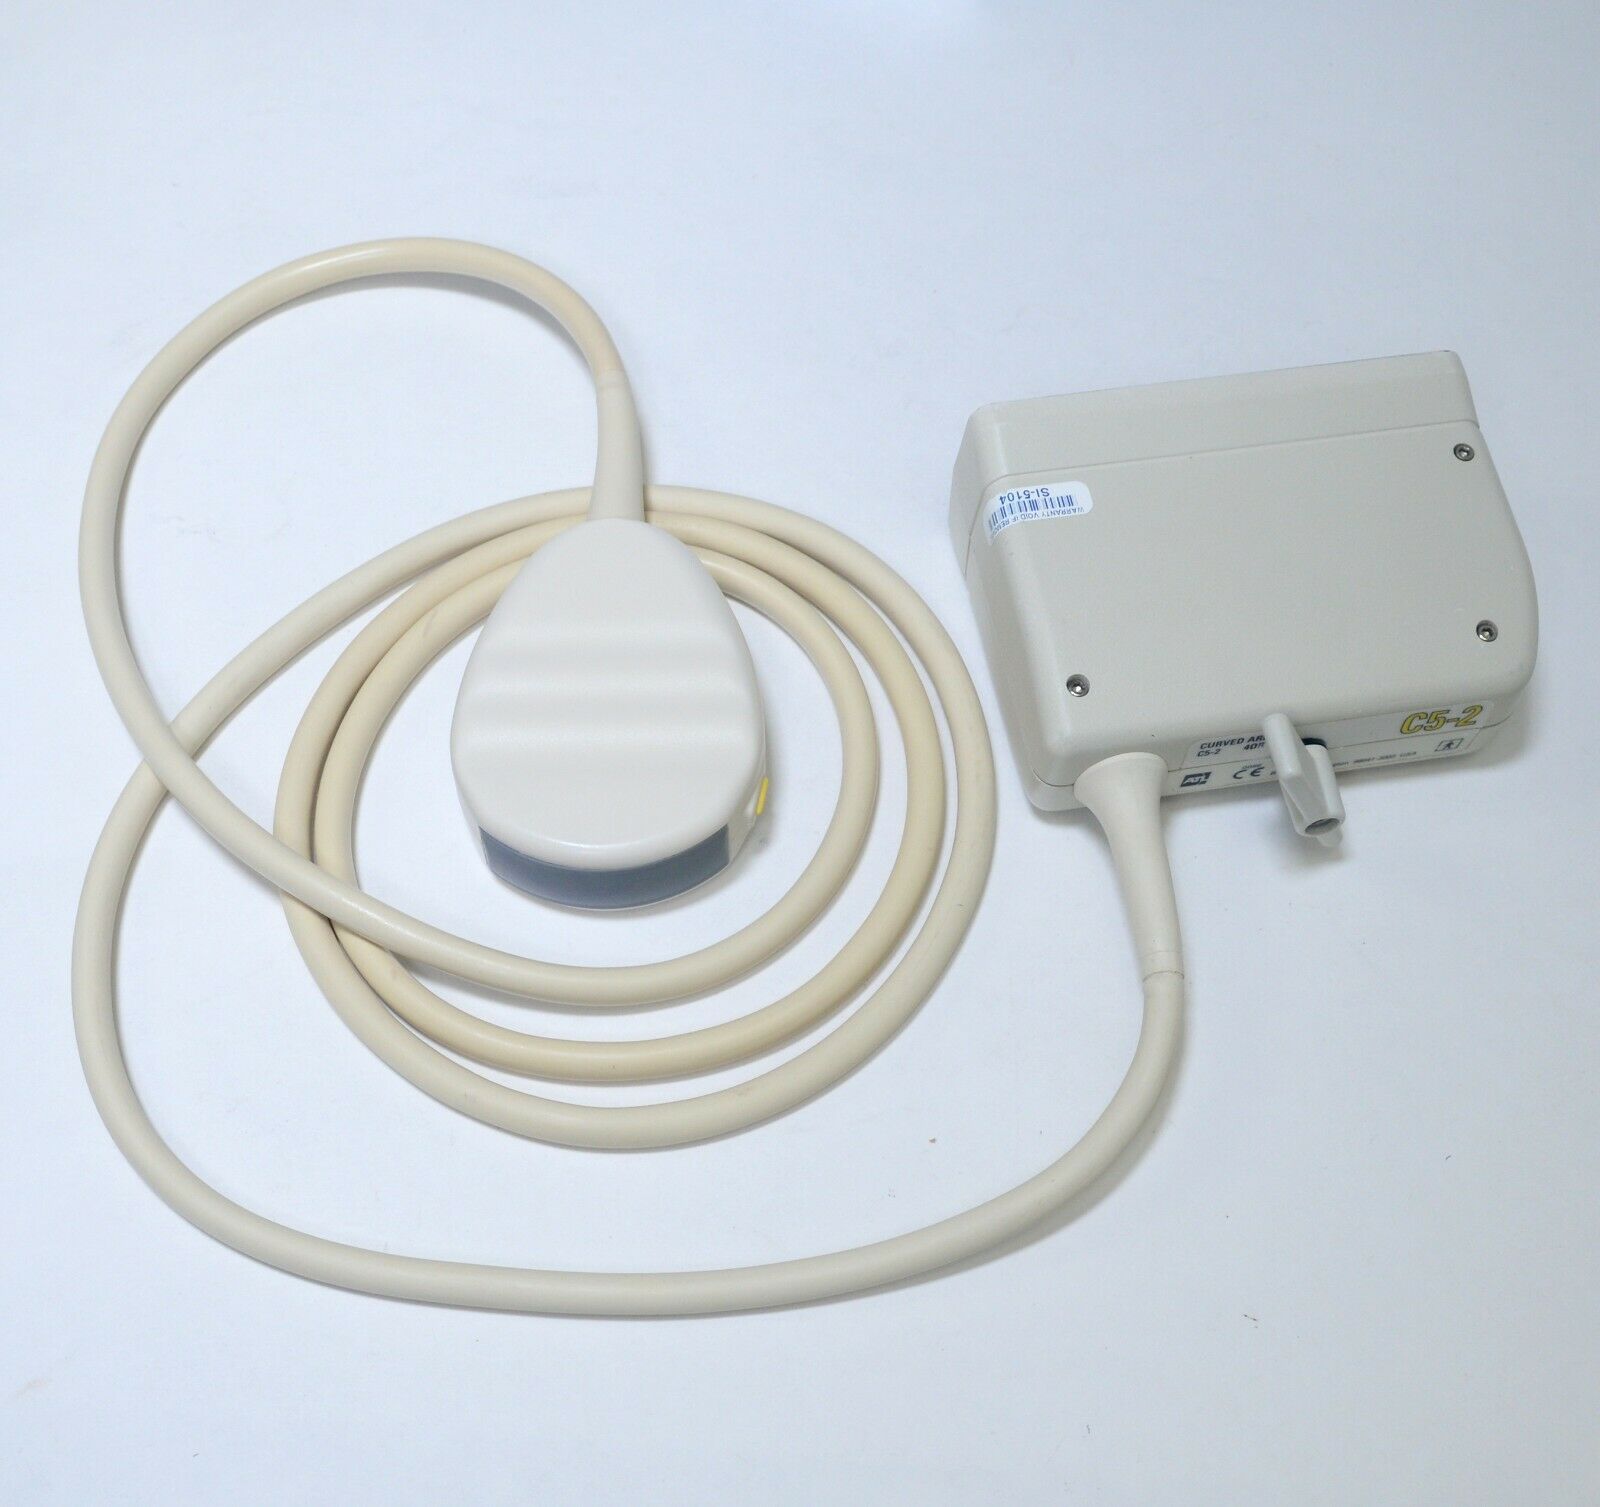 Philips ATL C5-2 Curved Array 40R Ultrasound Transducer  Probe #4000-0574-04 DIAGNOSTIC ULTRASOUND MACHINES FOR SALE